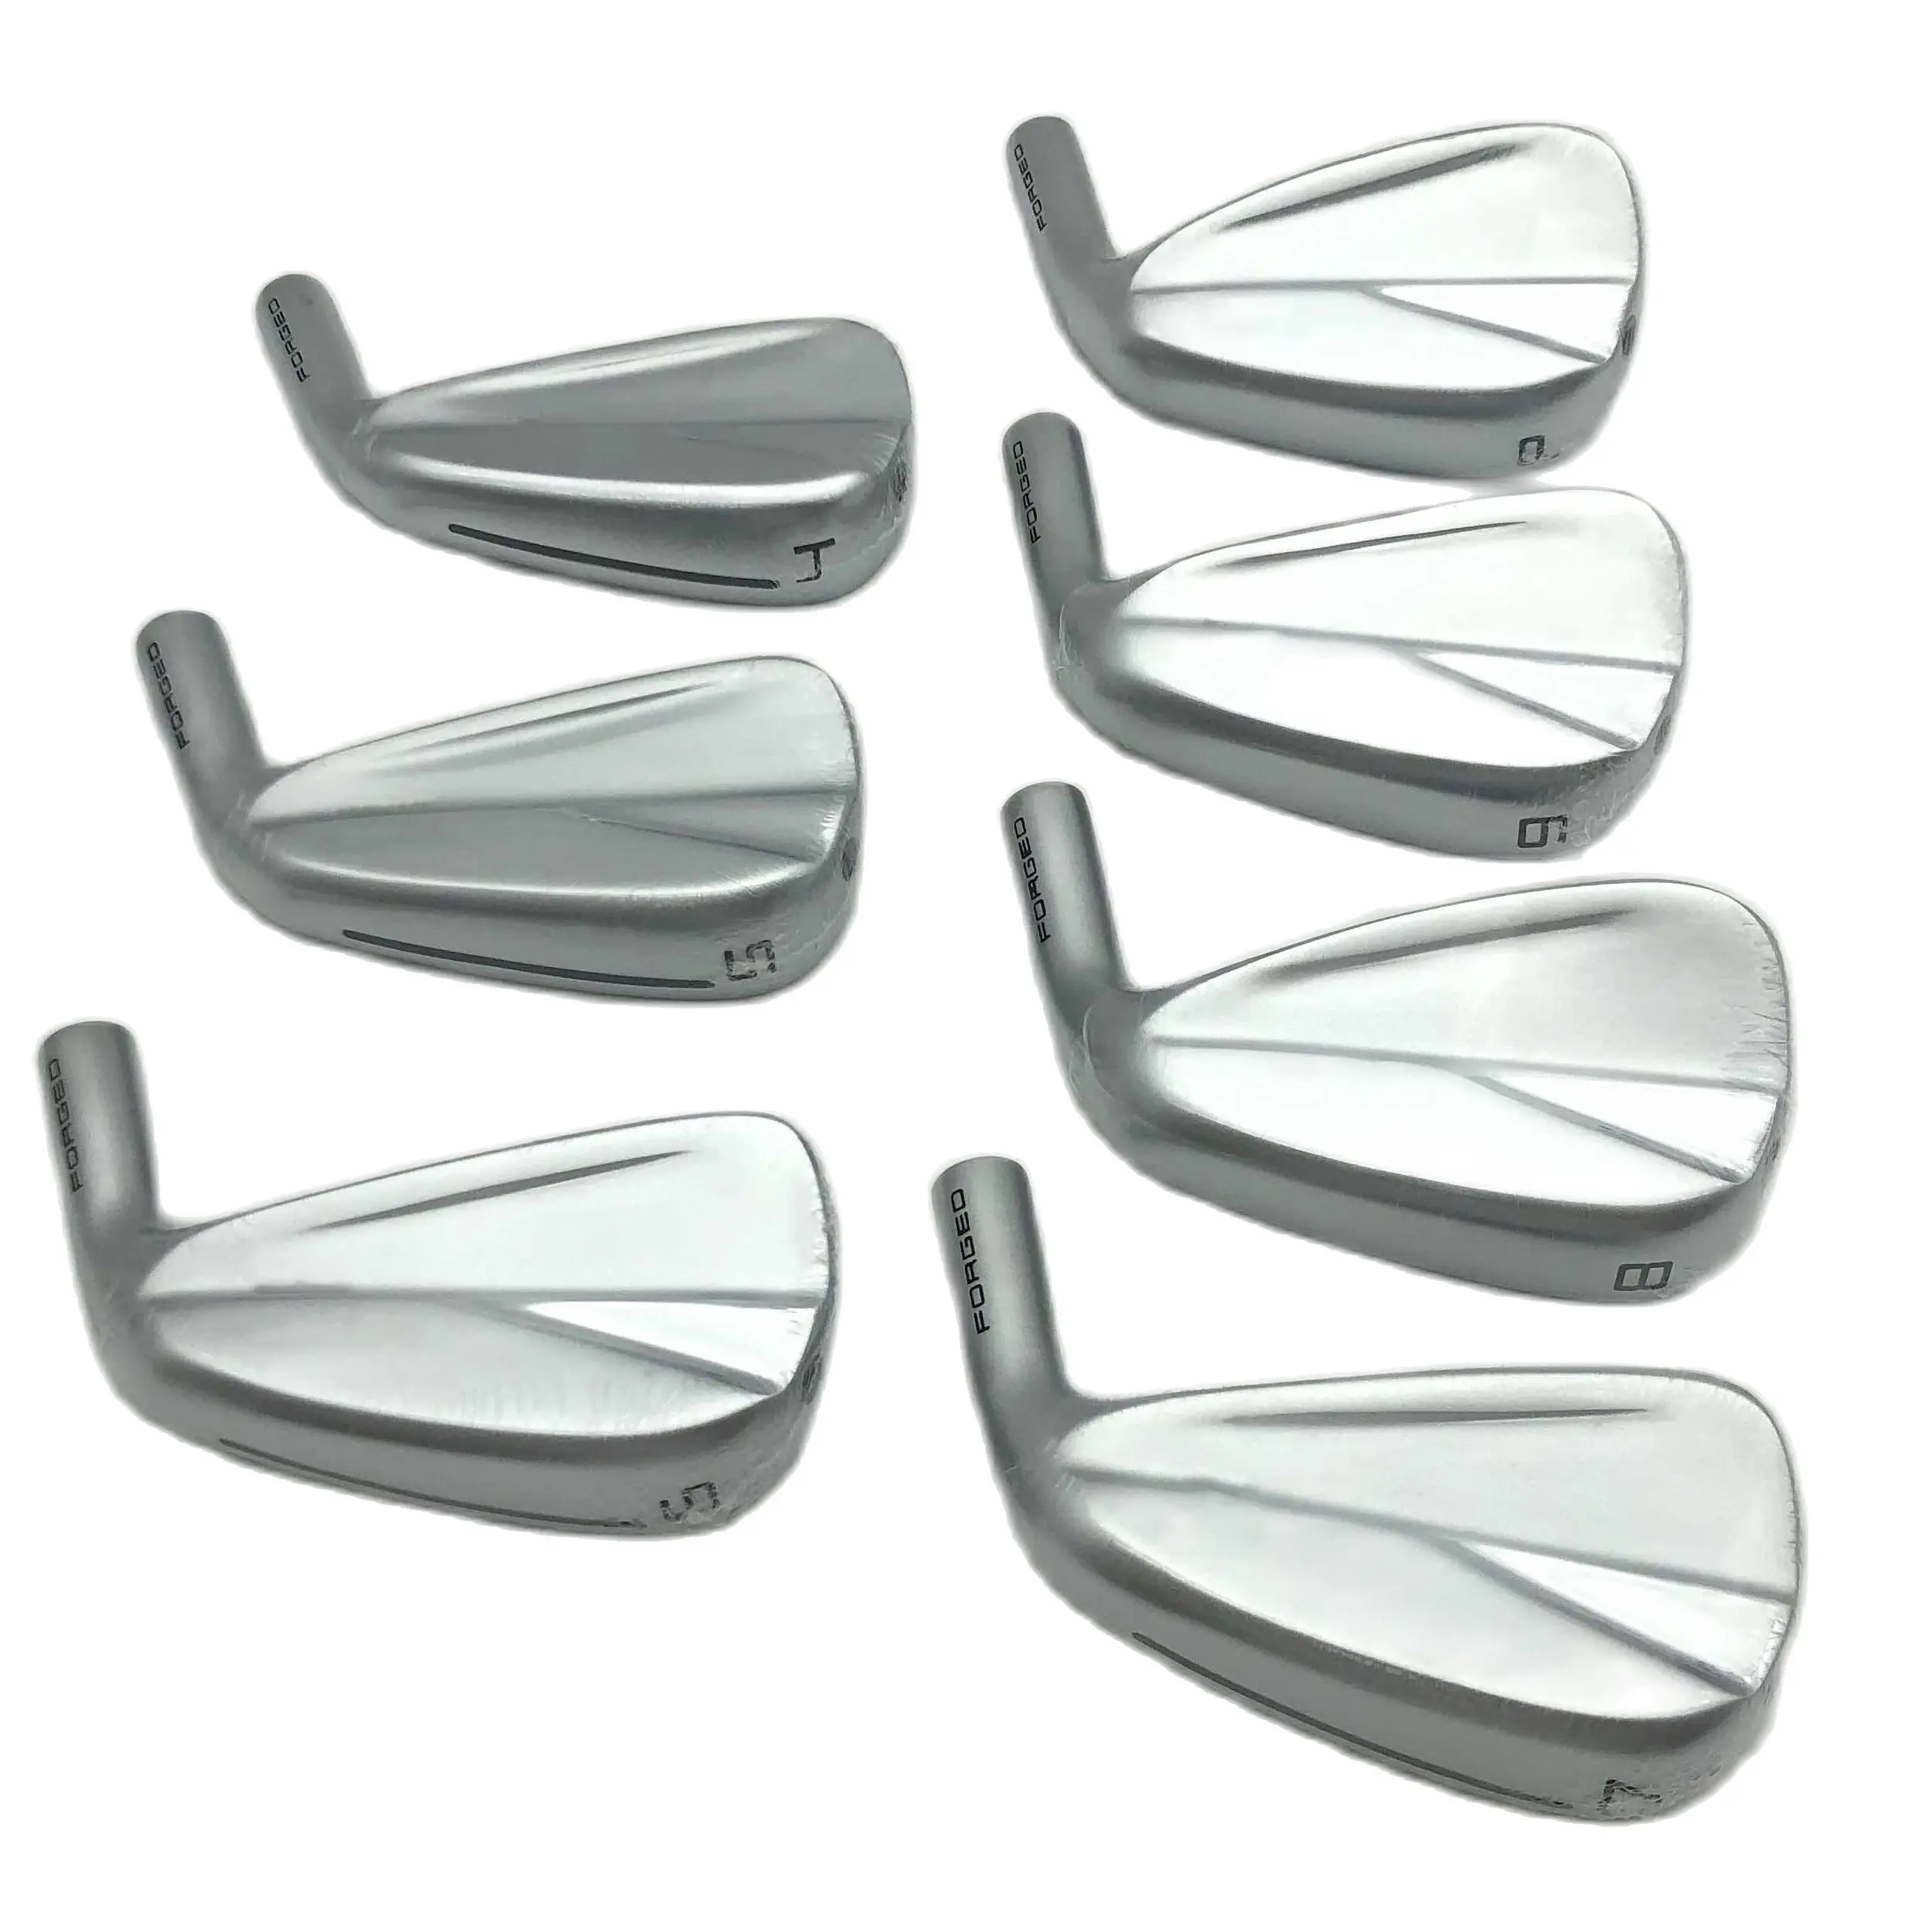 

TL made Silver P770 Golf Clubs P770 Iron Set Three Generations New Tour Long Distance Forged Hollow Blade Back 456789P Free Ship